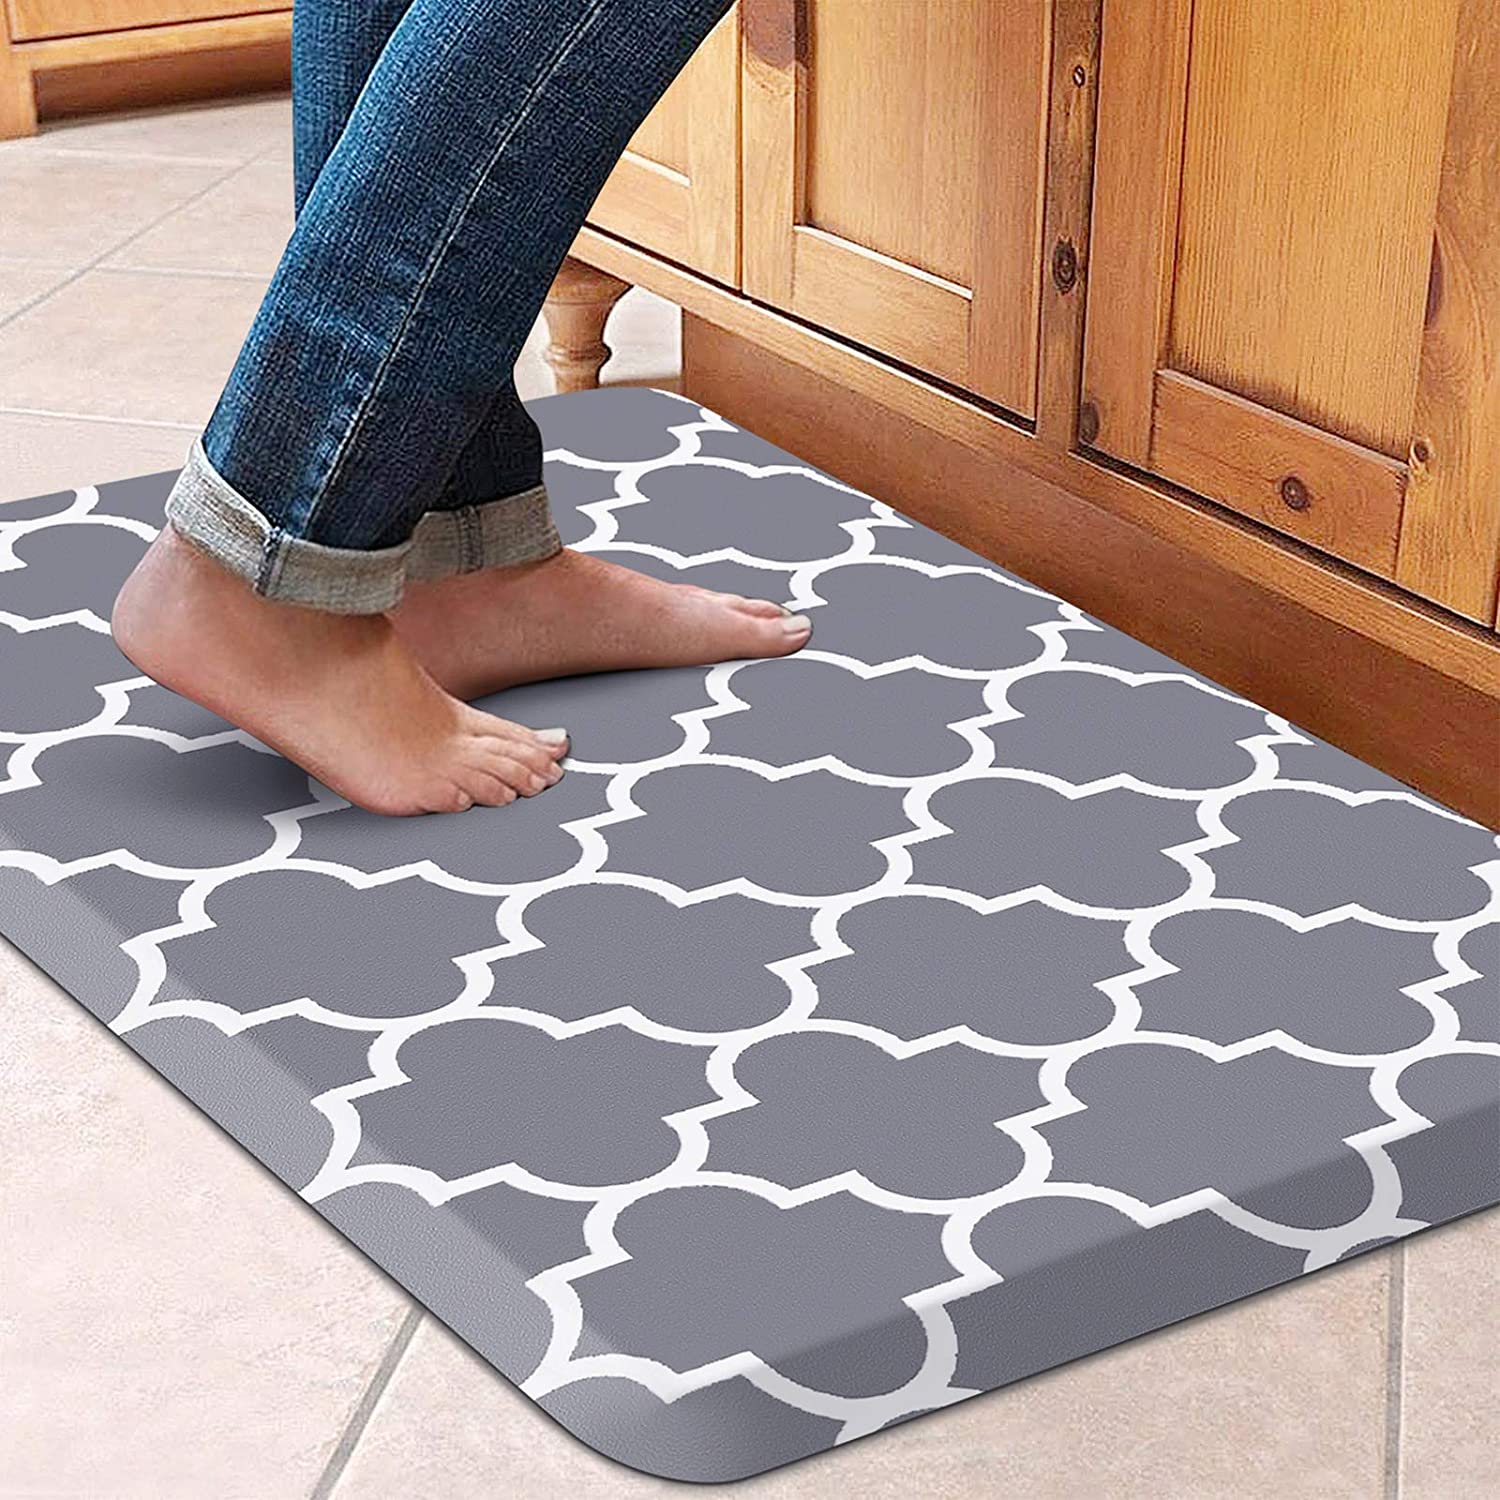 WISElife Kitchen Mat Anti Fatigue for back pain - woman standing on grey kitchen rug with white pattern